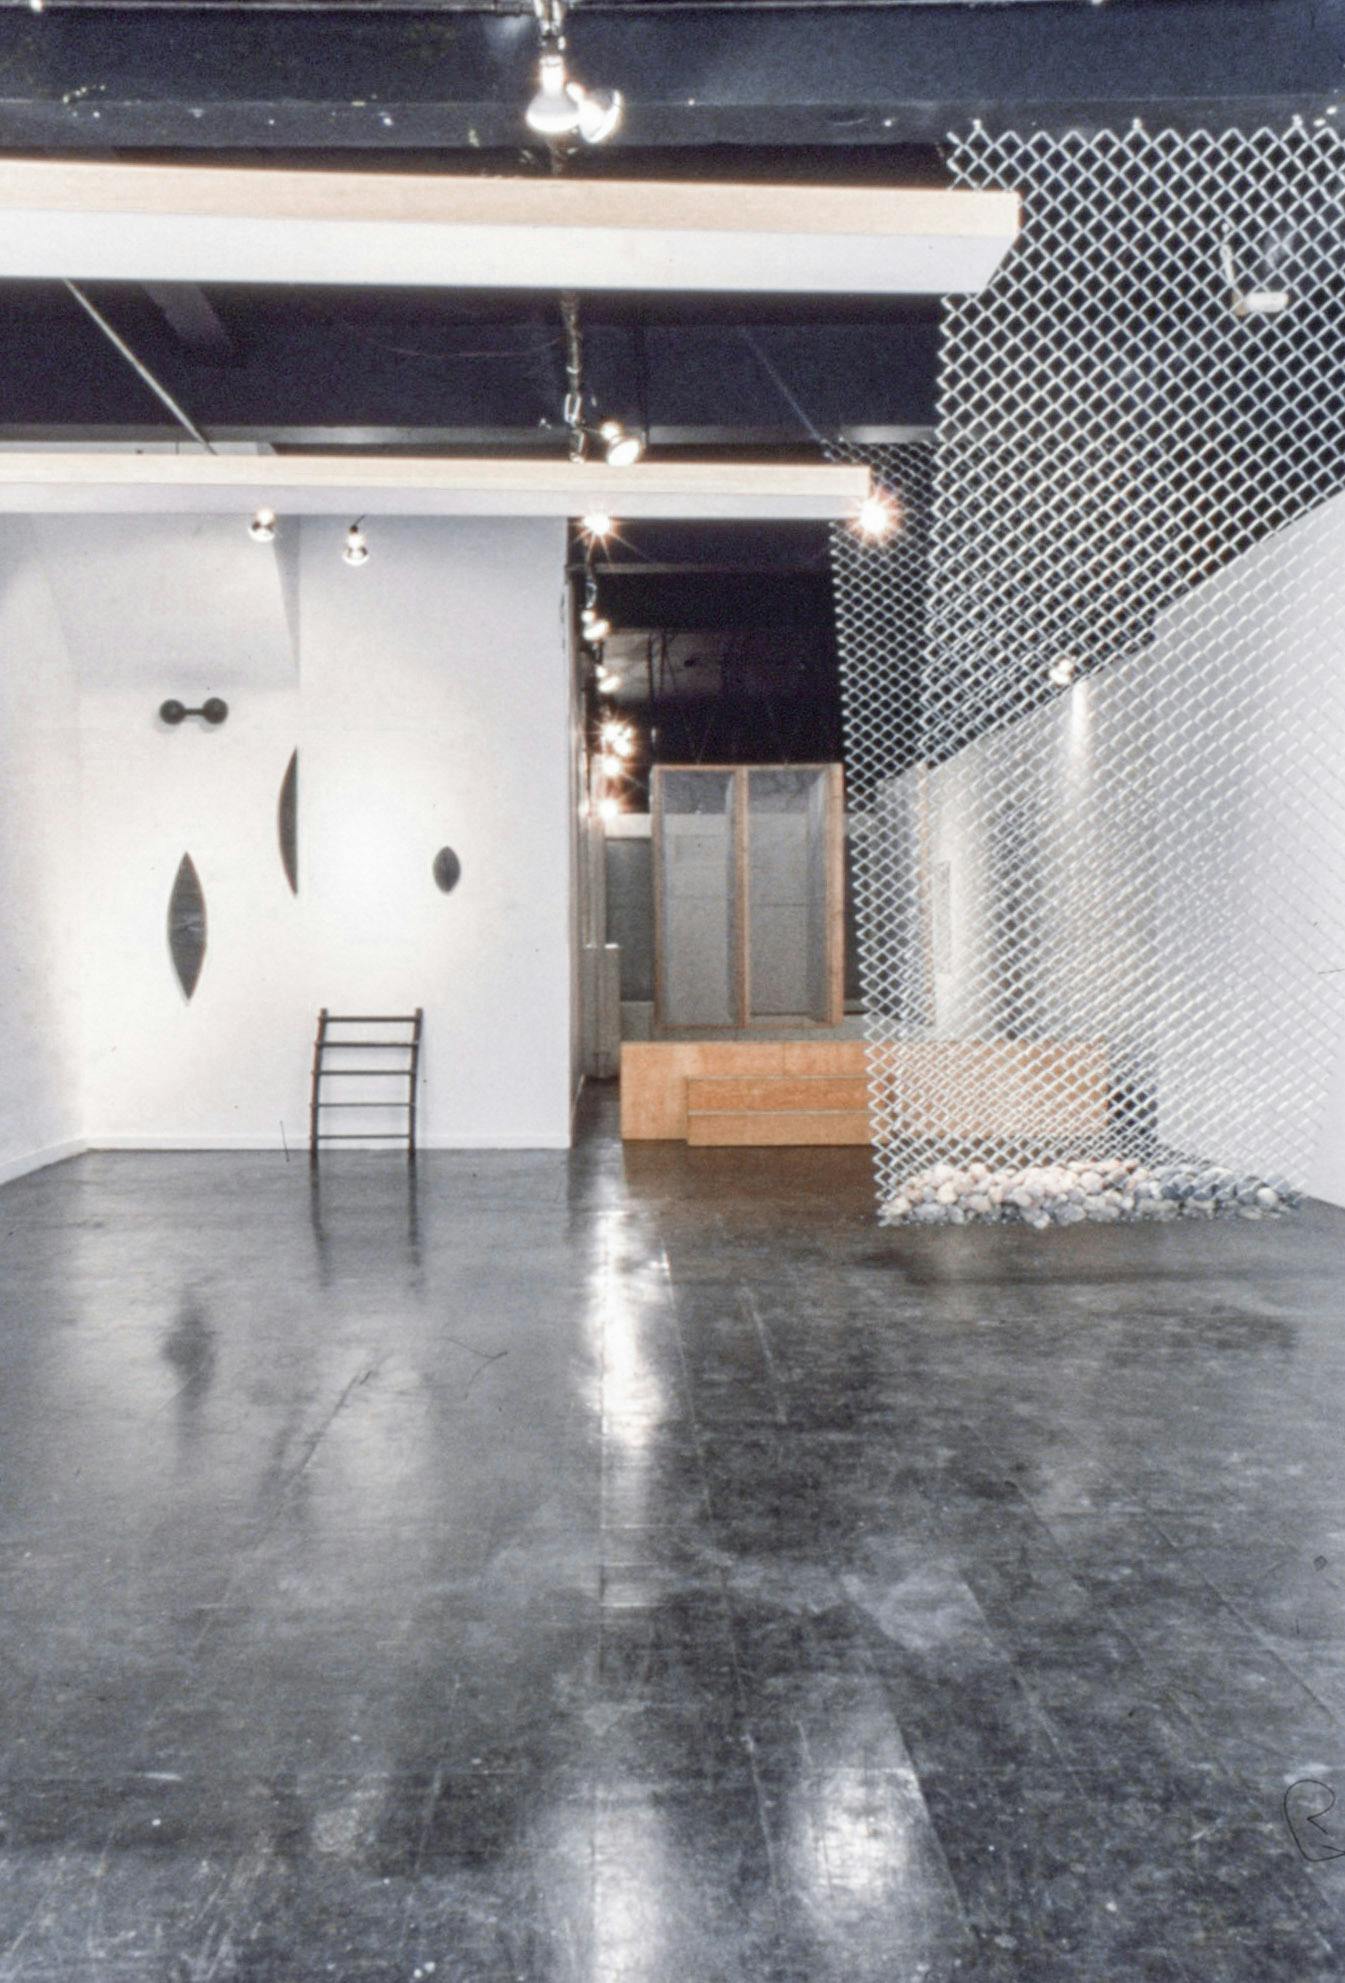 Artworks in a gallery. In the foreground, there is a suspended metal net with rocks. There are small black objects mounted on one wall, and a wooden platform with a closet-like form on top of it.